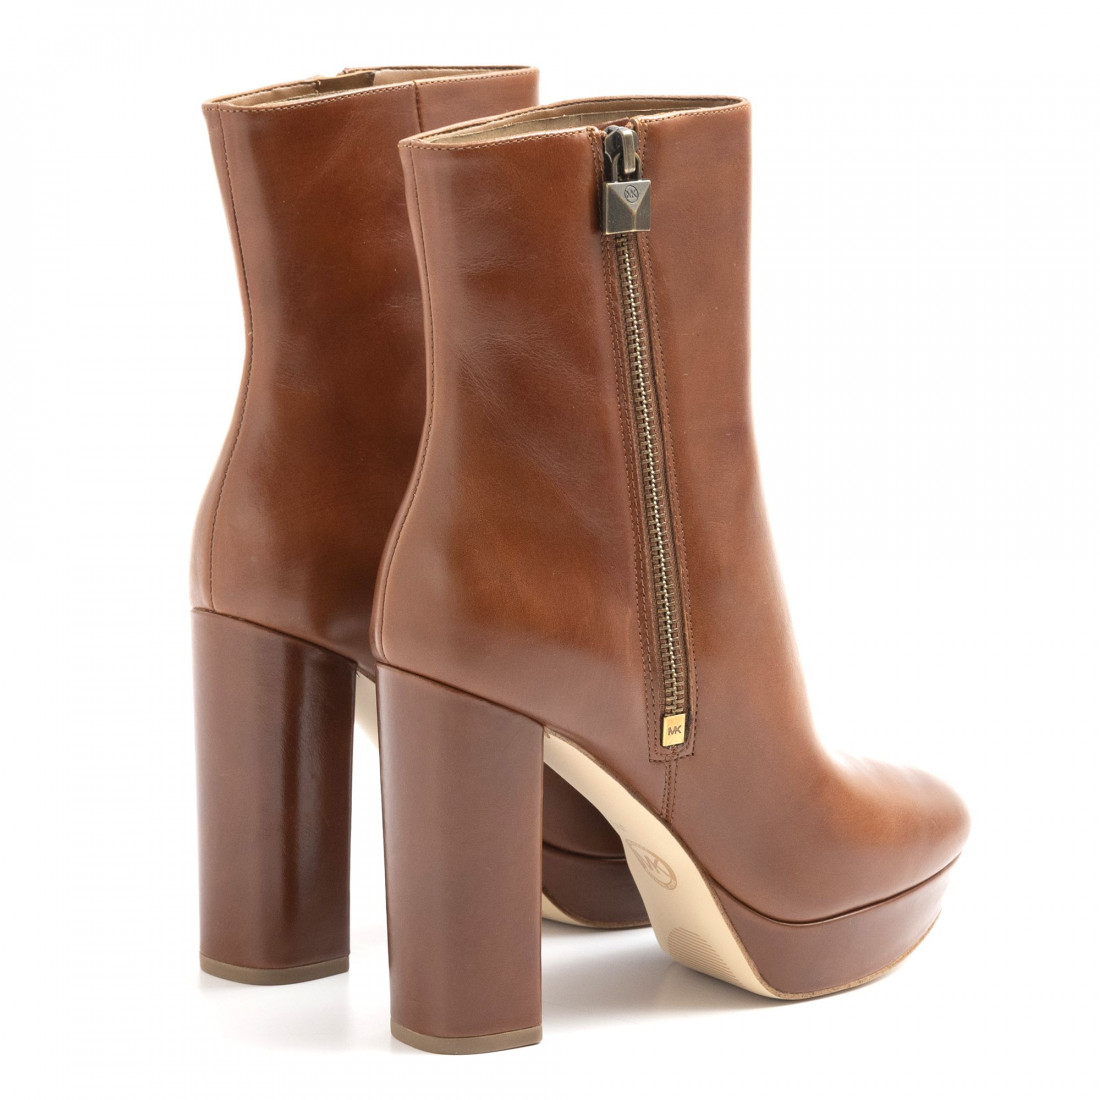 michael kors frenchie bootie